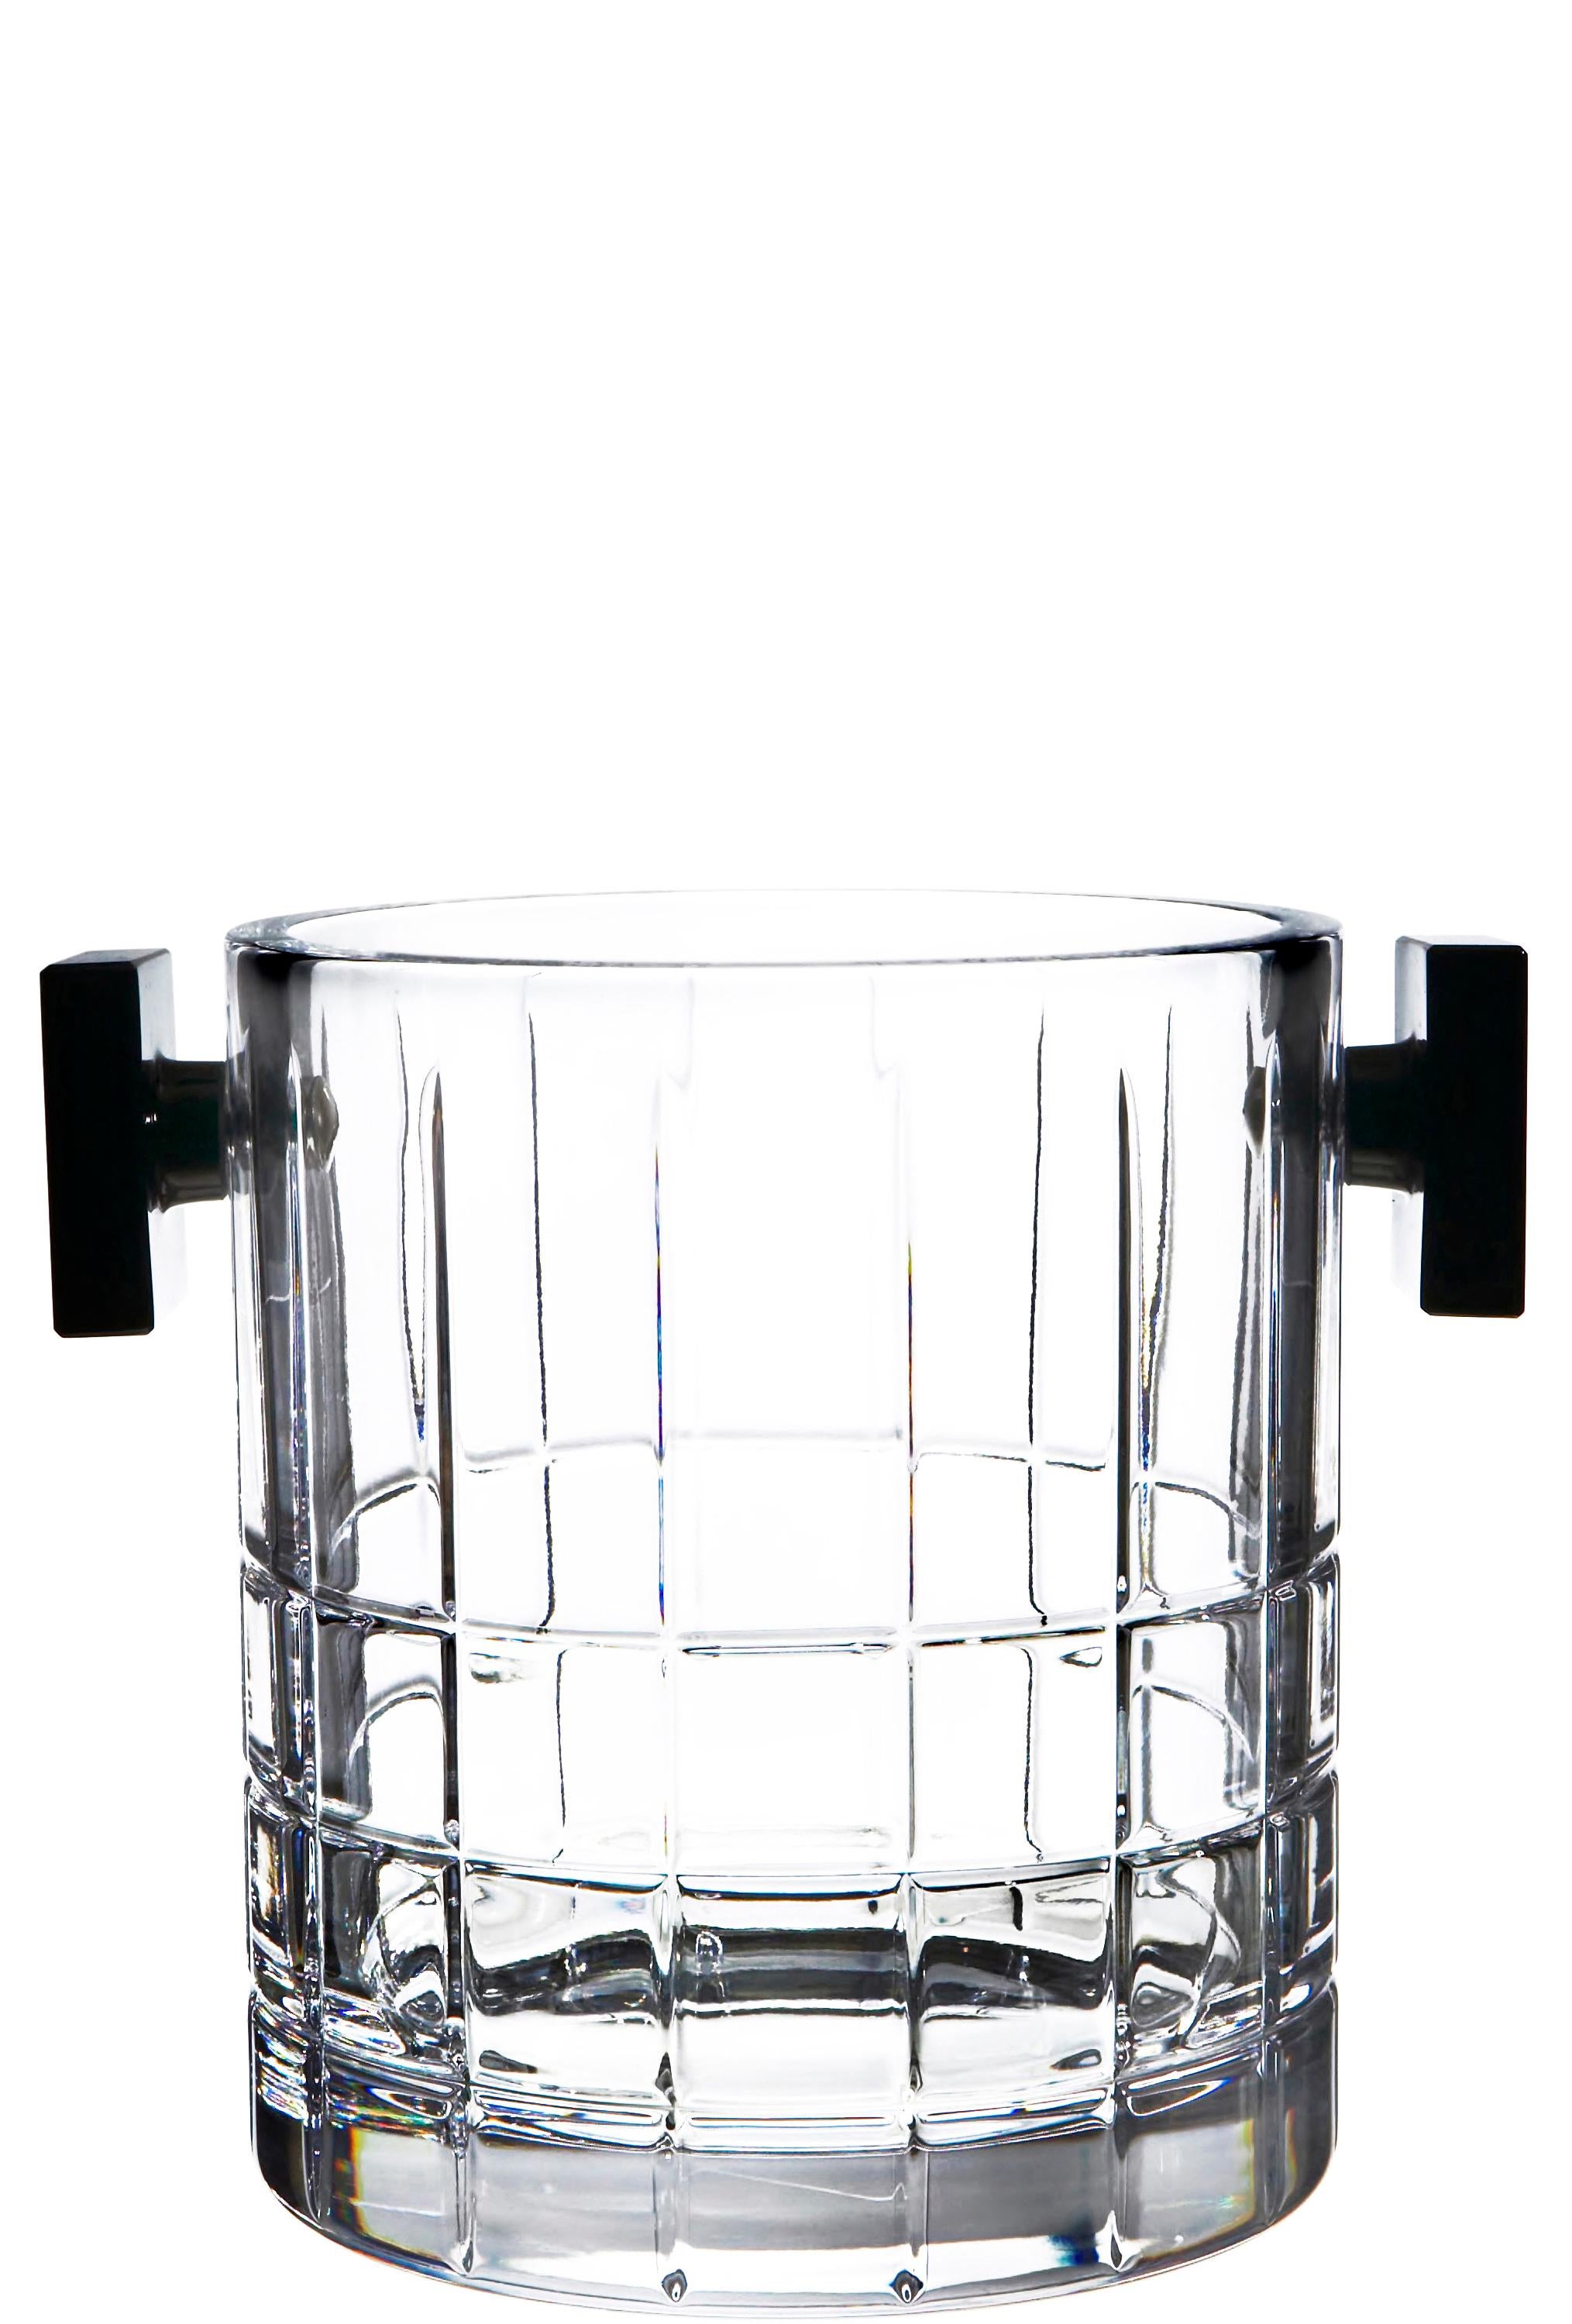 Street Ice Bucket from Orrefors is ideal for holding ice for drinks or chilling a bottle of wine. The ice bucket has a checked motif of straight lines inspired by the criss-cross streets and avenues of Manhattan, New York, with square handles making